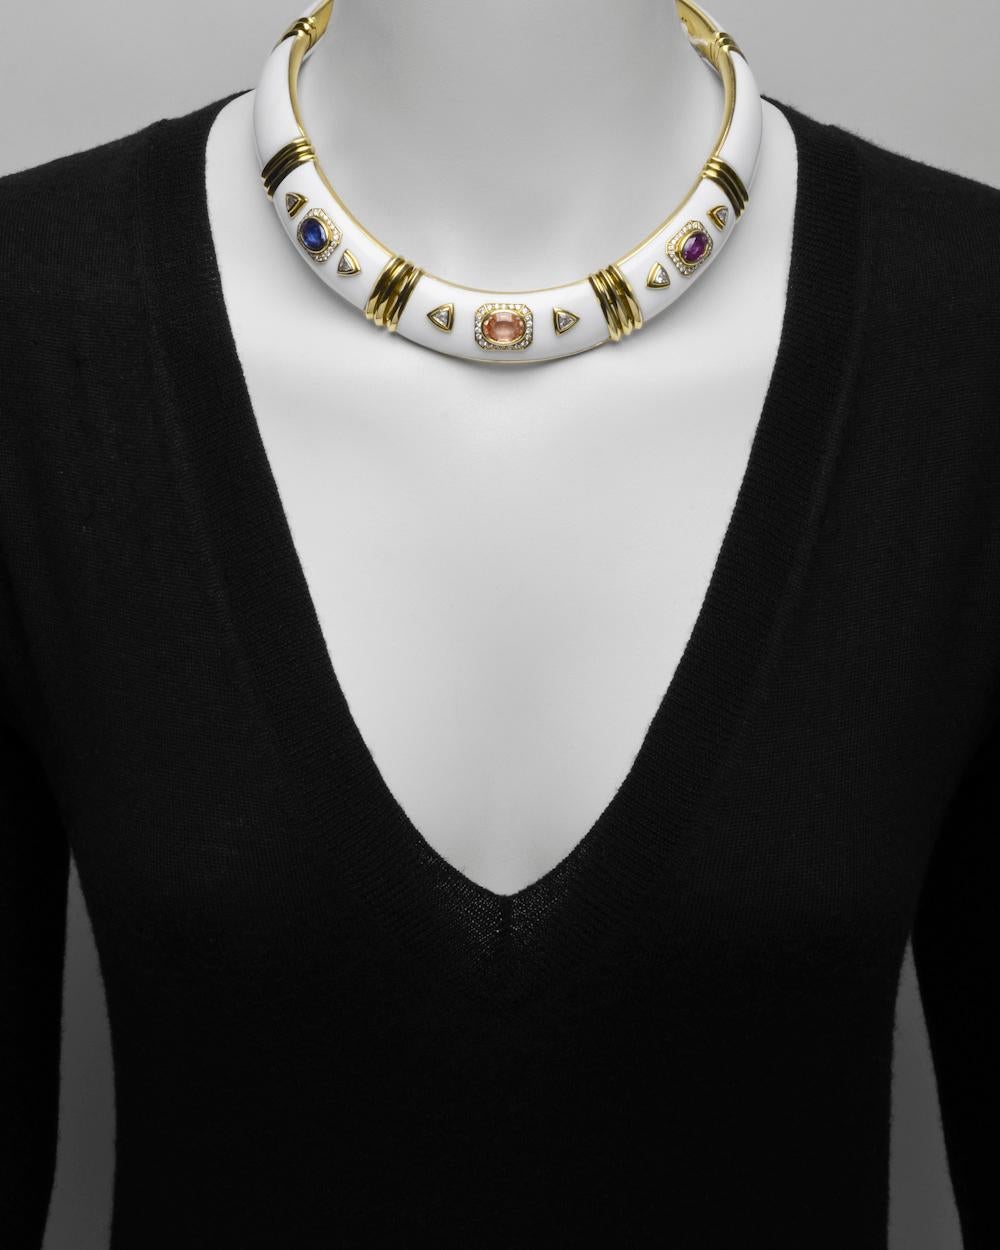 Collar necklace with matching ear clips, in 18k yellow gold and white enamel. The necklace set with an oval-shaped blue, peach-toned and pink sapphire together weighing approximately 10.00 total carats accented by trillion-cut and round-cut diamonds